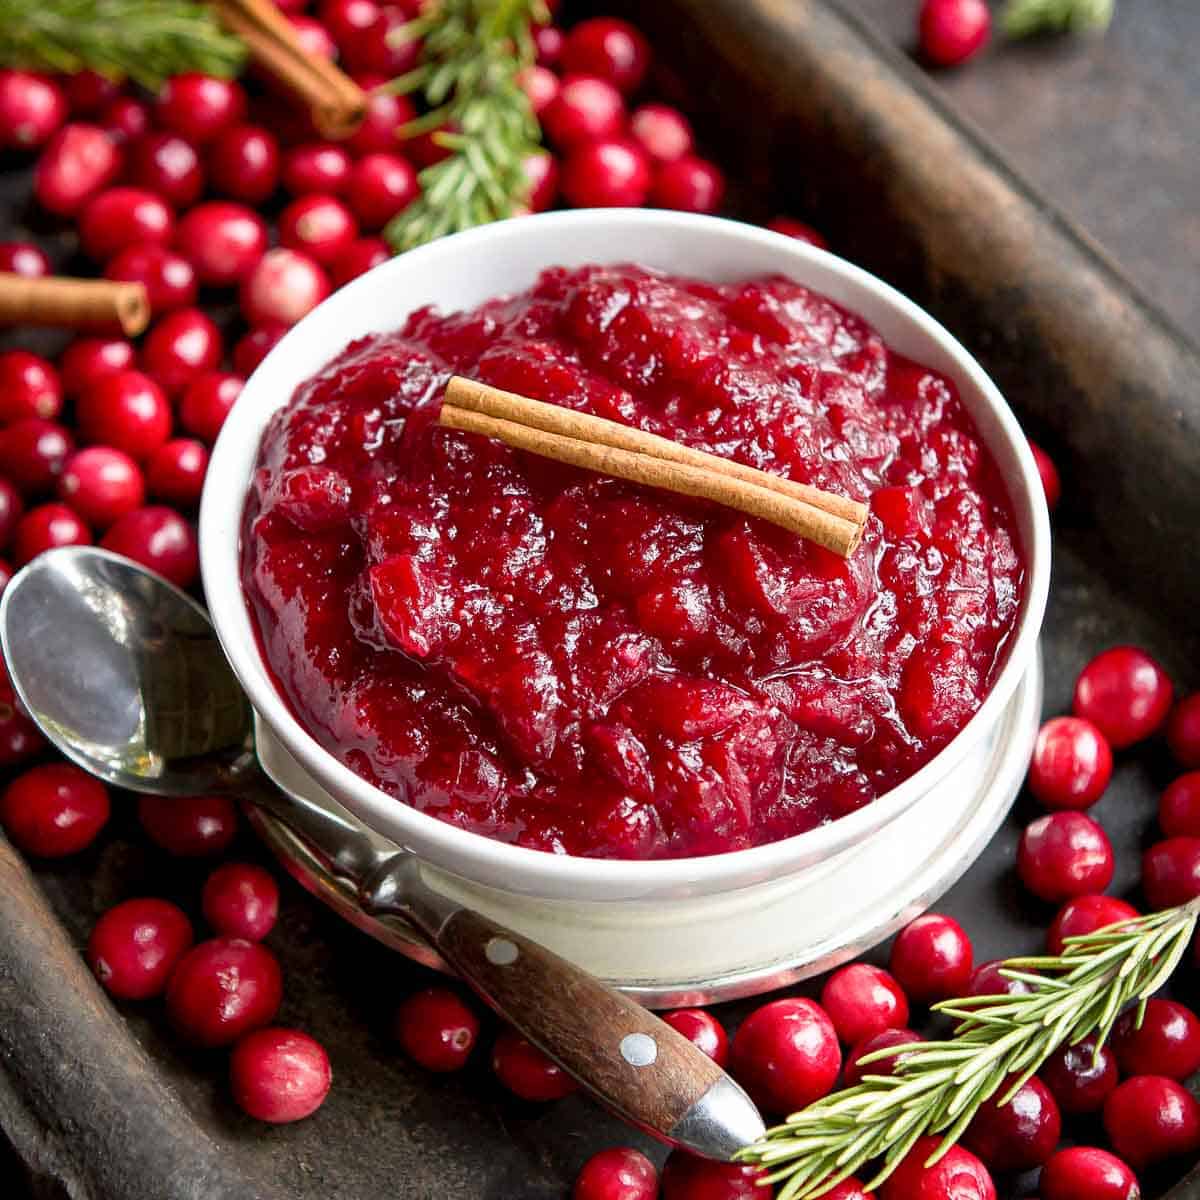 Cranberry sauce in a white bowl on a metal platter with loose fresh cranberries.